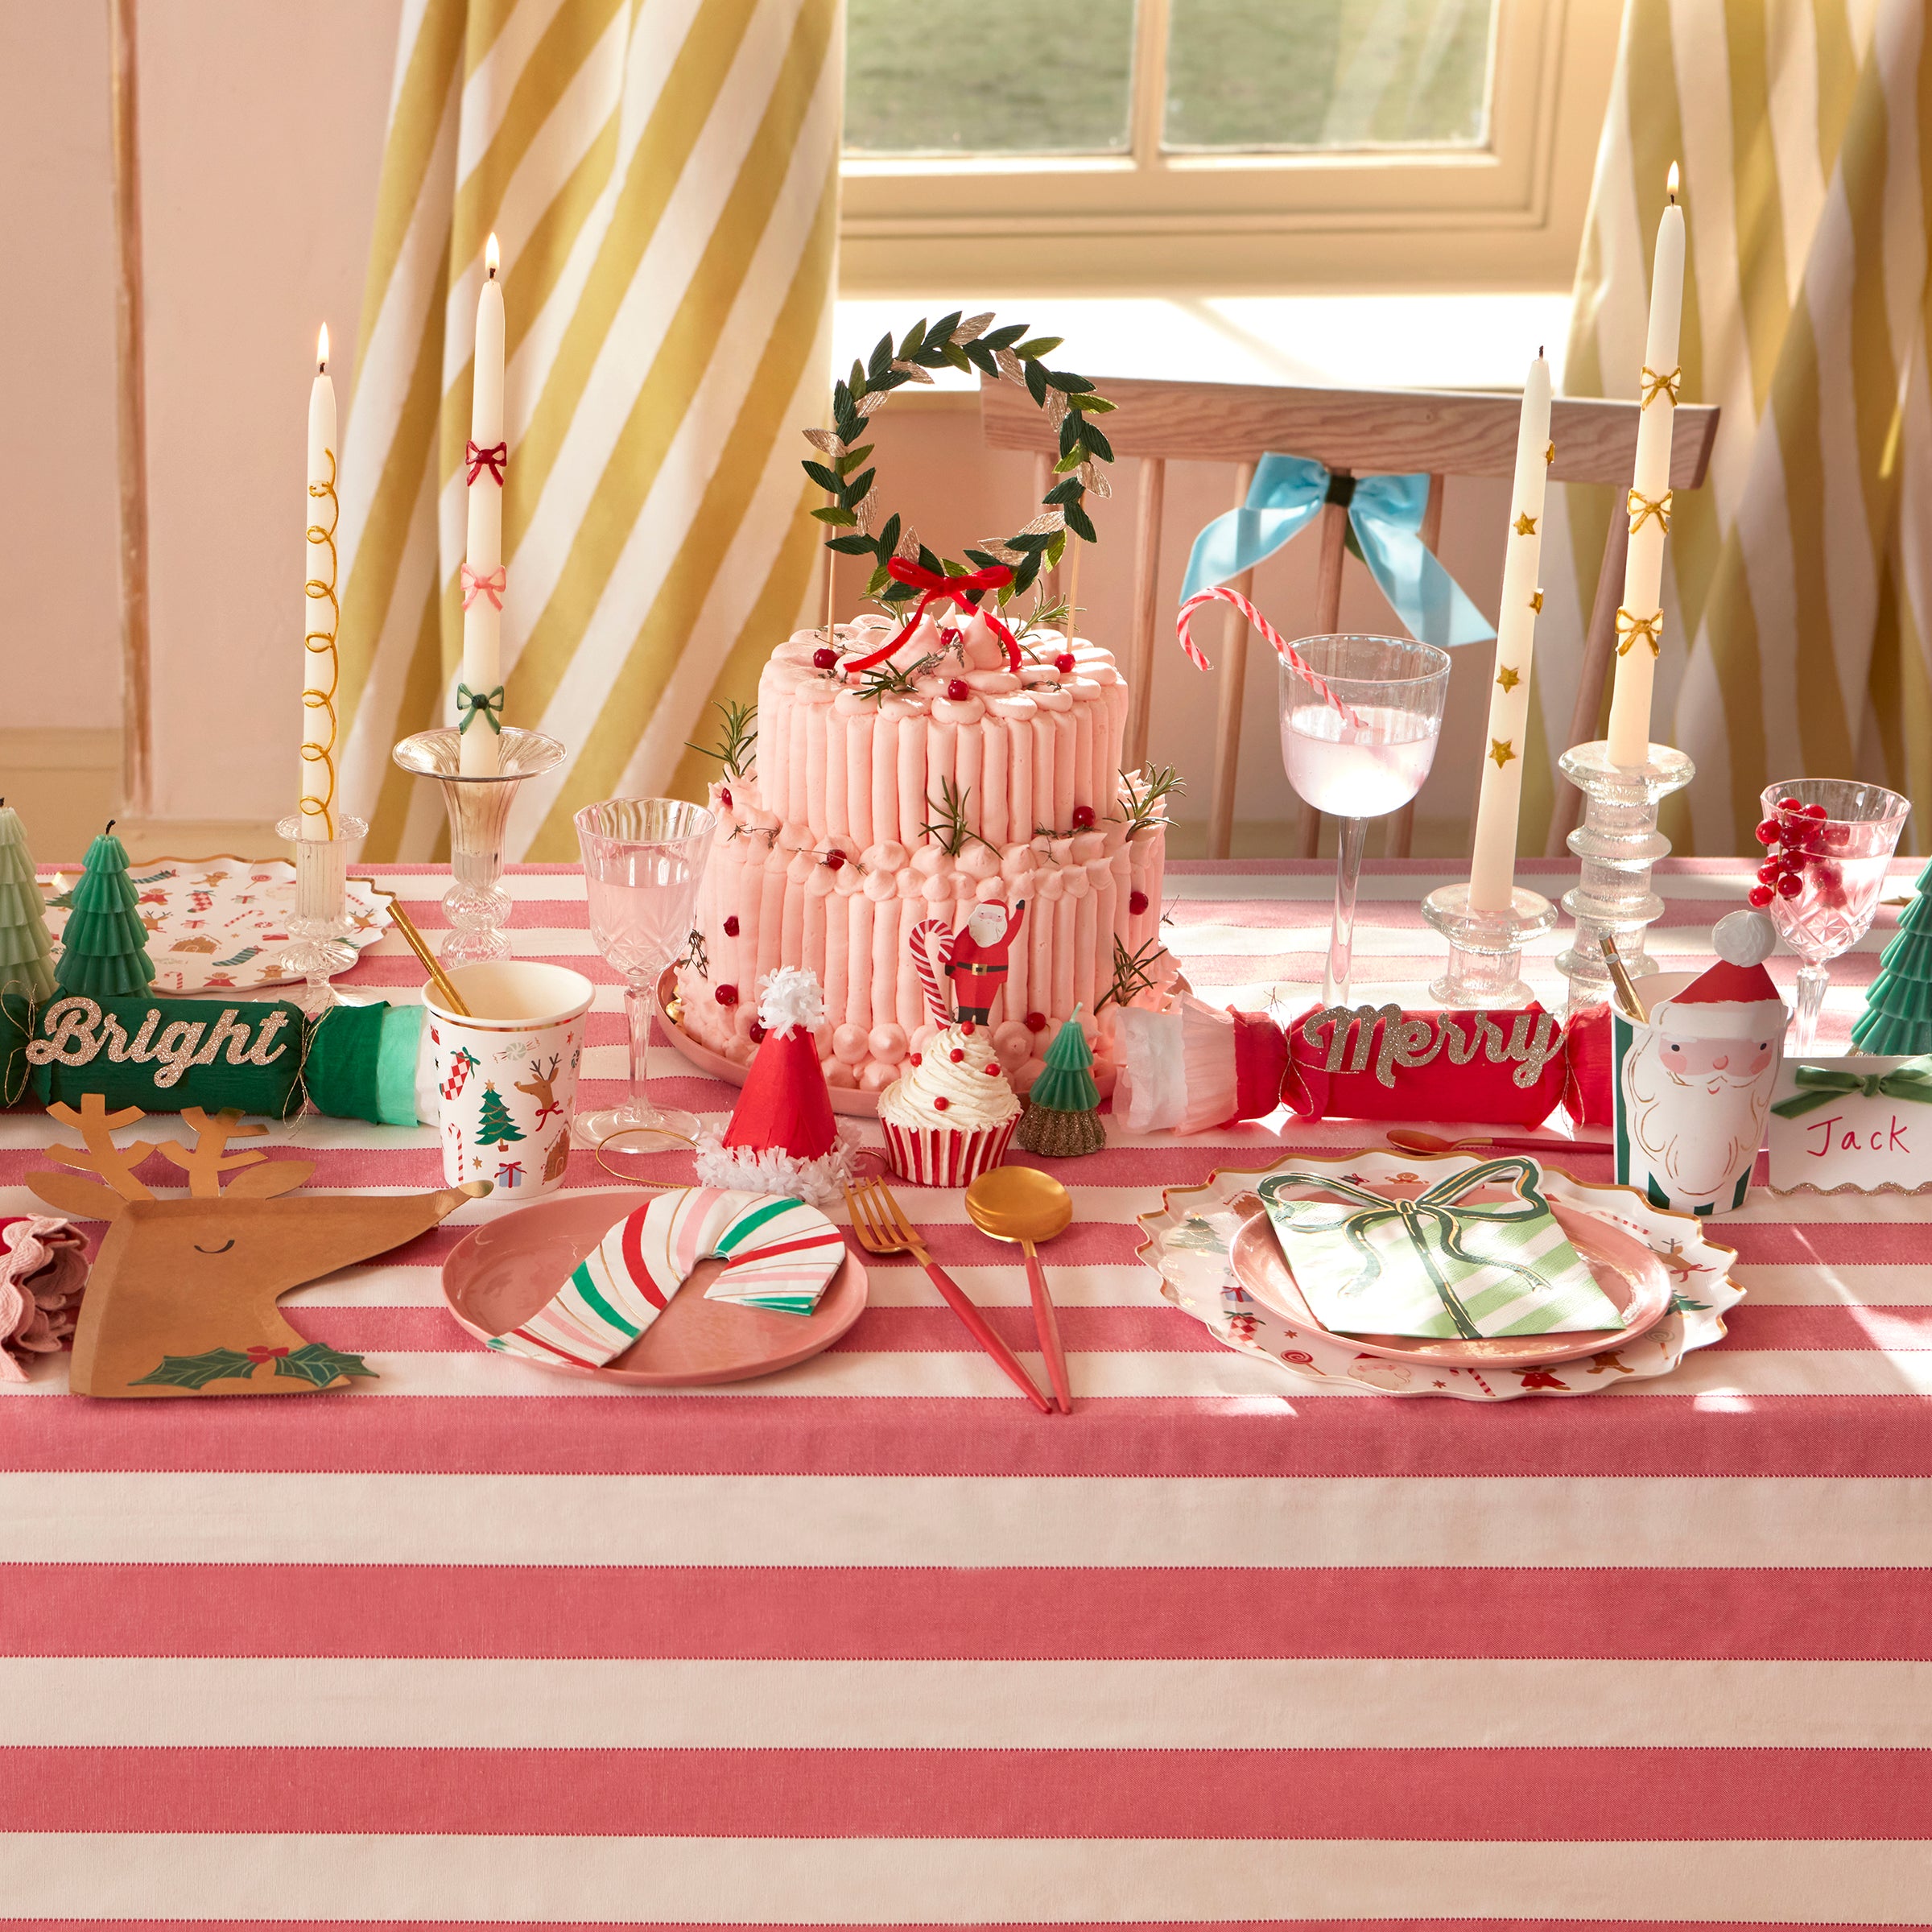 Our party napkins, designed to look like candy canes, are great for a Christmas cocktail party or for Christmas table decorations.